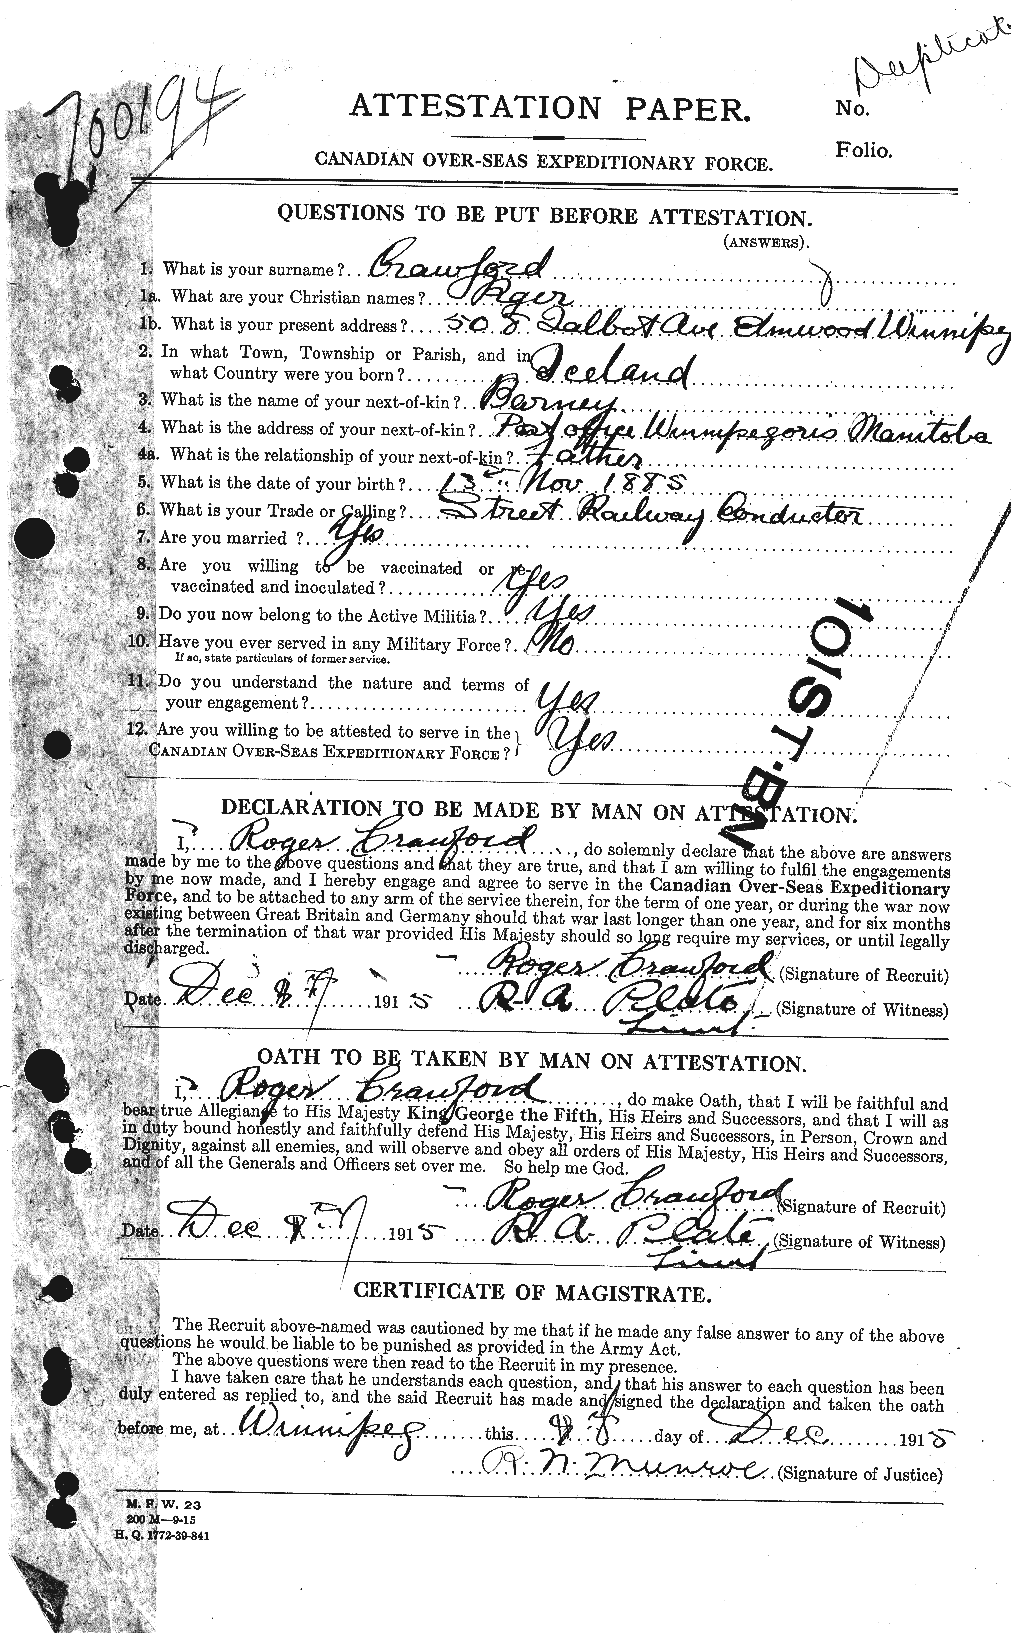 Personnel Records of the First World War - CEF 061392a